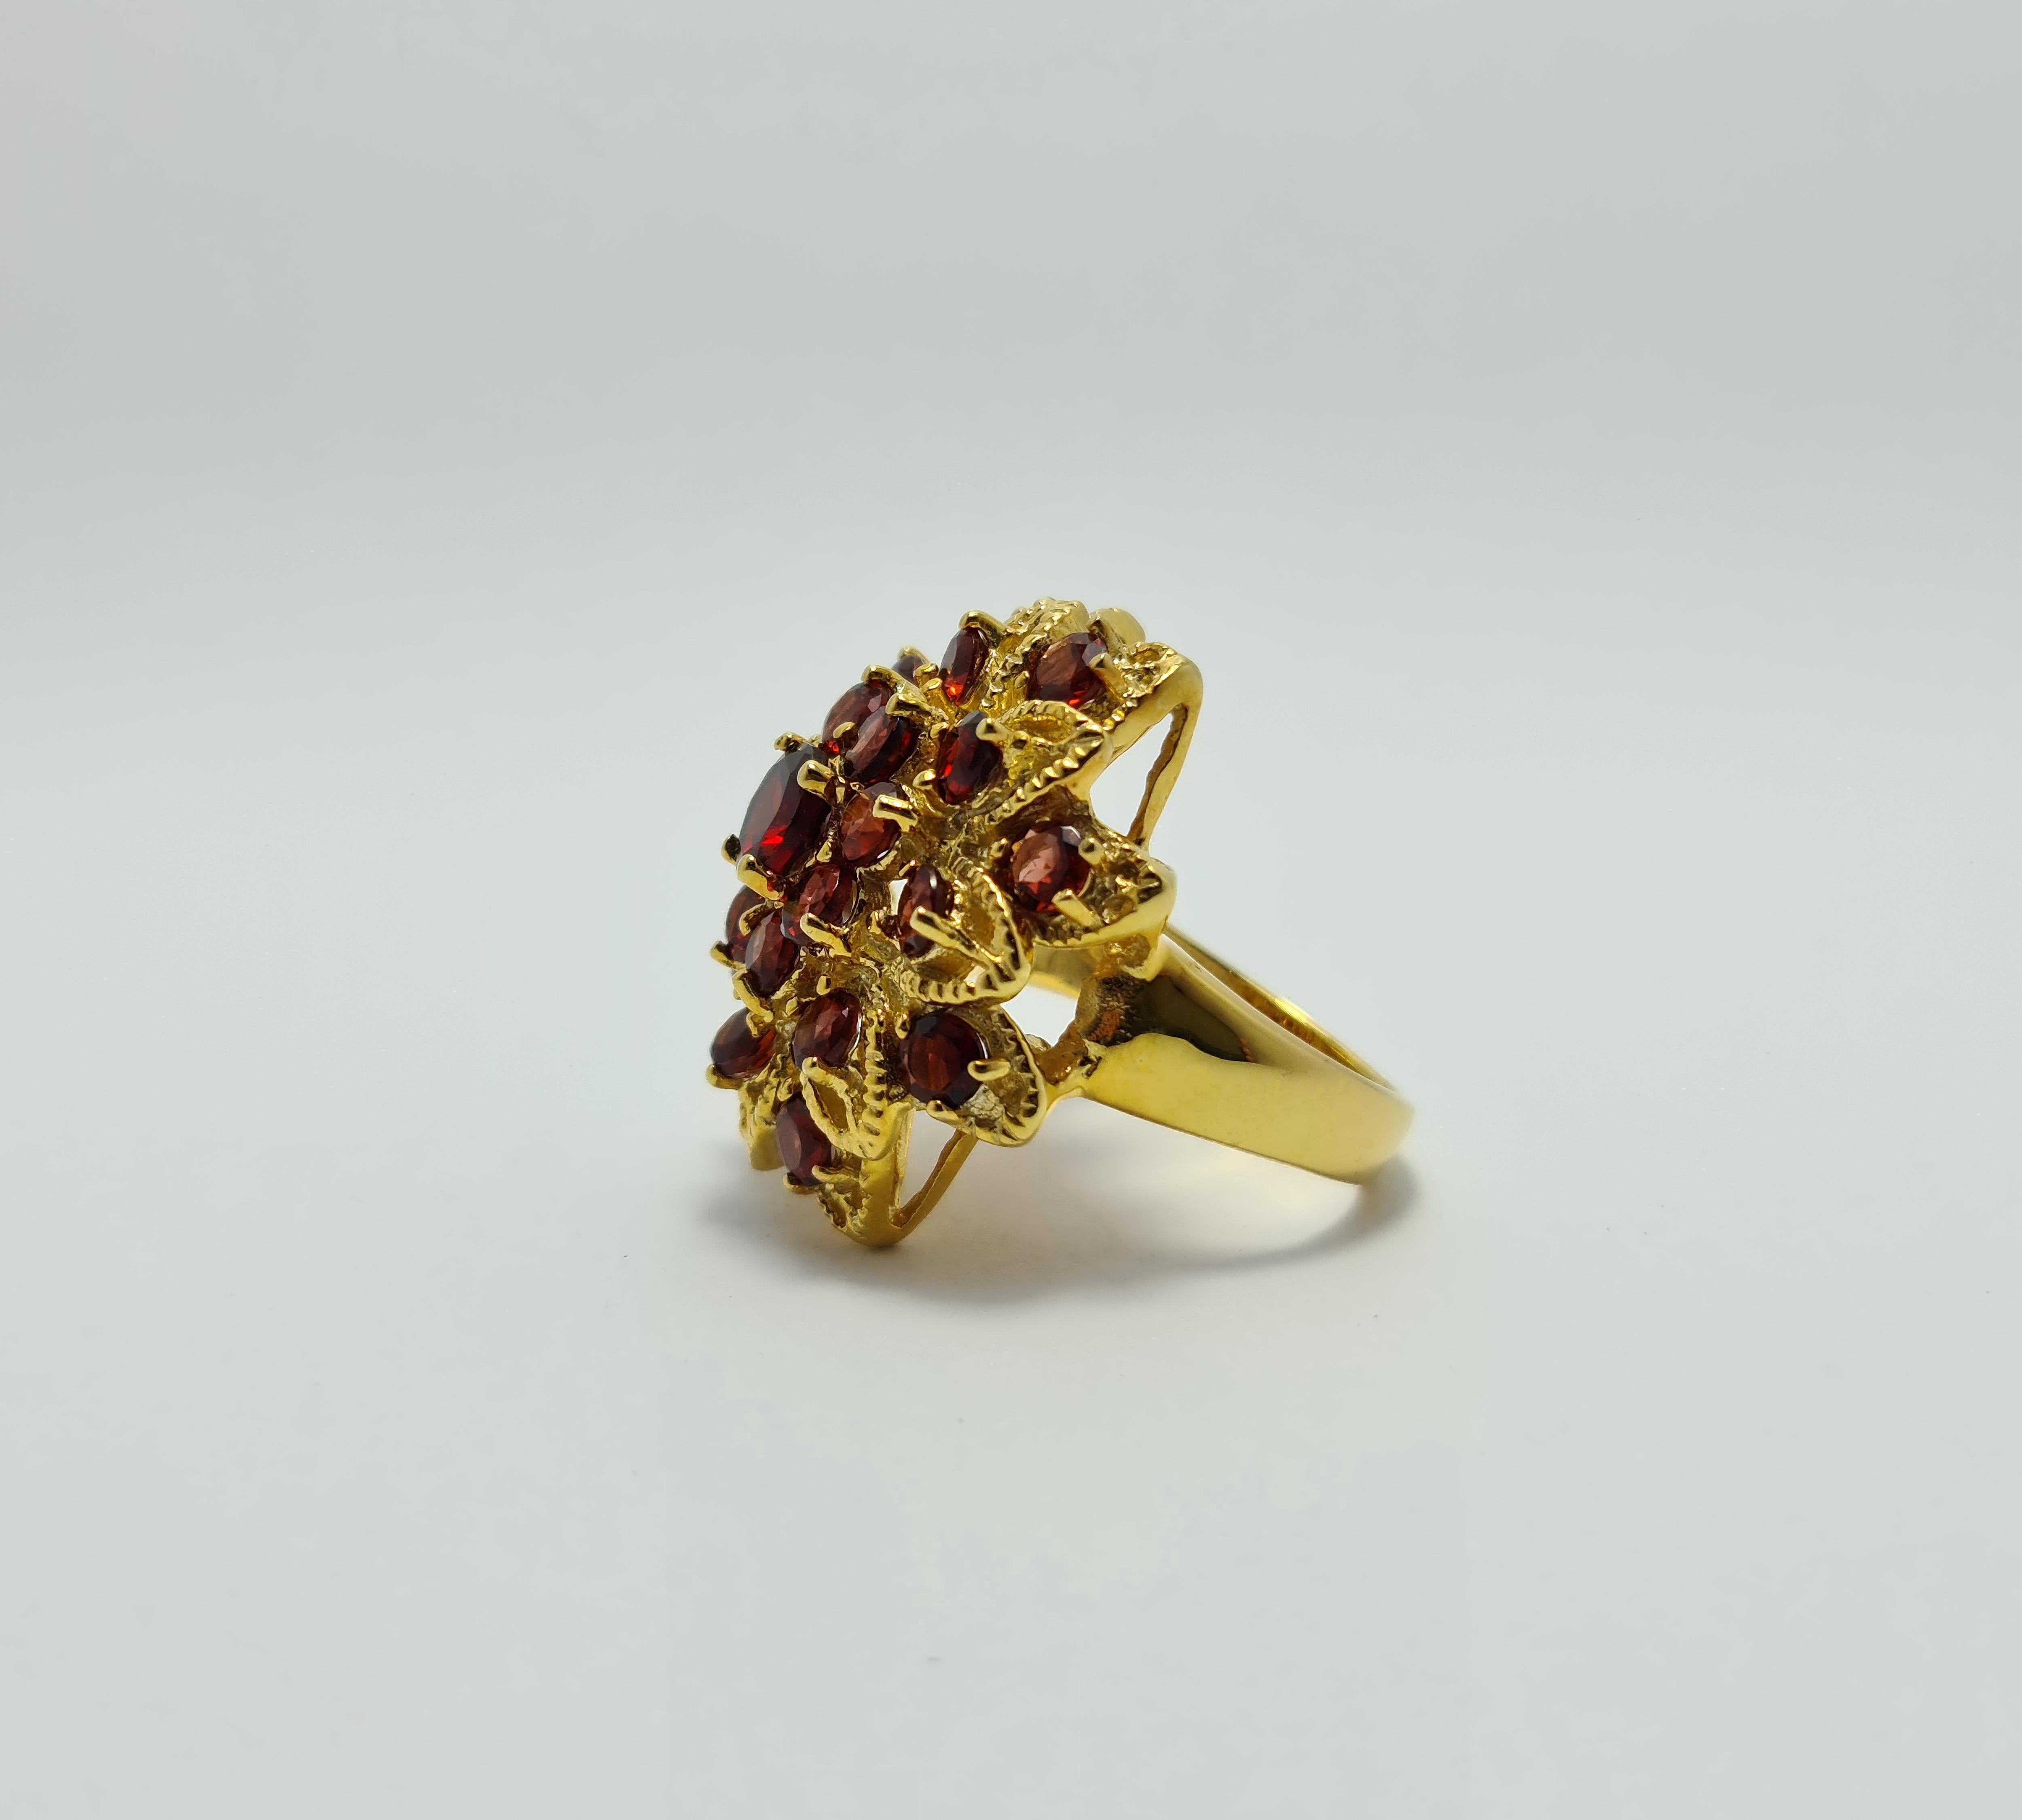 Natural Untreated Brazilian Deep Red Garnet Sterling Silver Gold Plated Flower Ring

Total weight of the ring: 11 grams
Total weight of Garnet: 8 carats